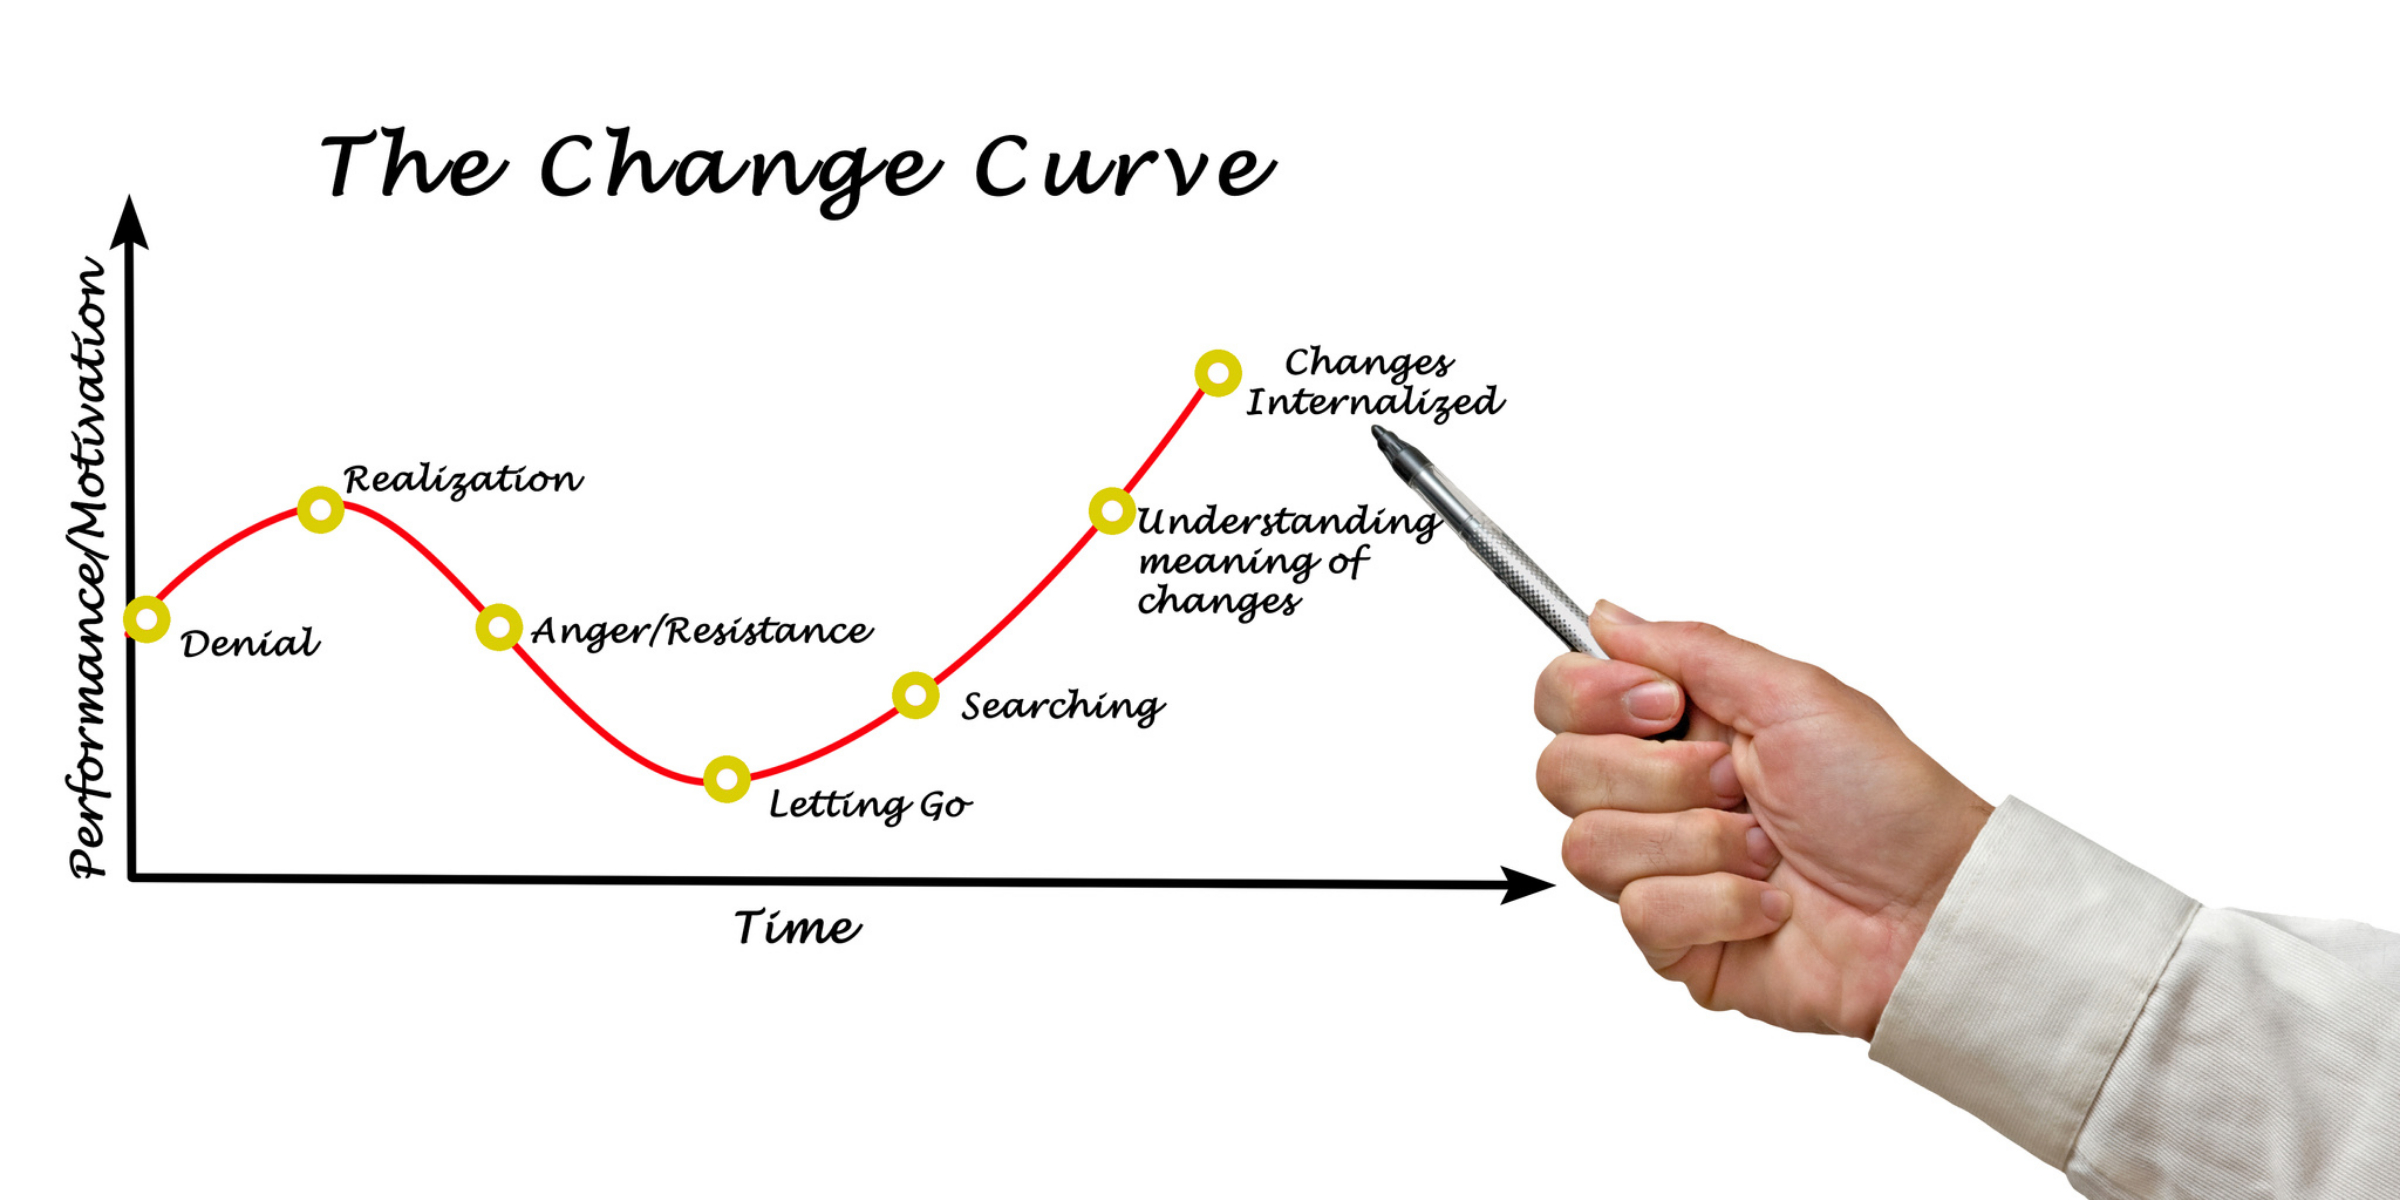 A Guide To Understanding The Change Curve Model And How To Use It